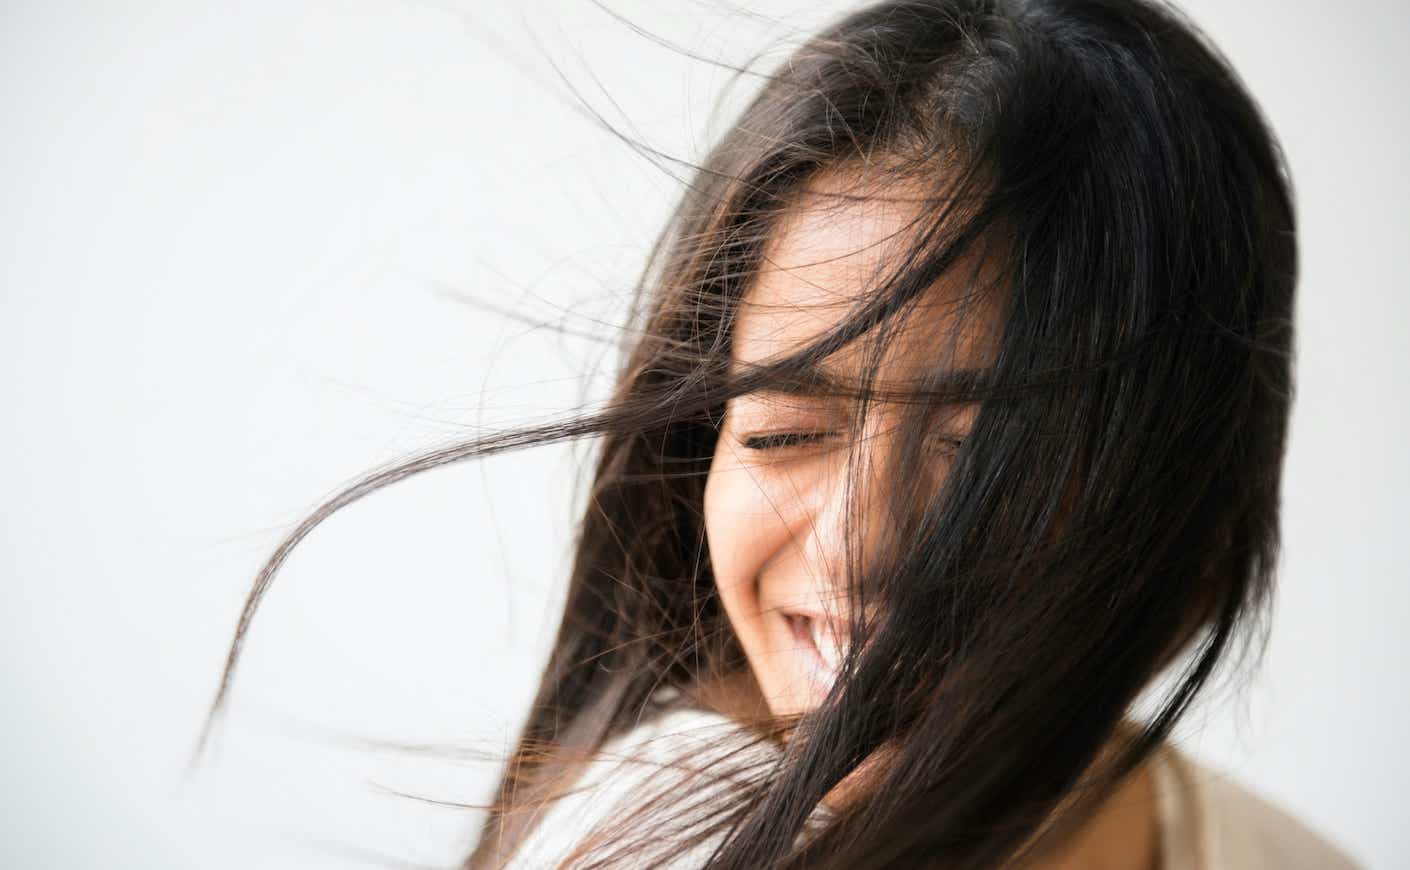 Hair of Indian woman blowing in wind